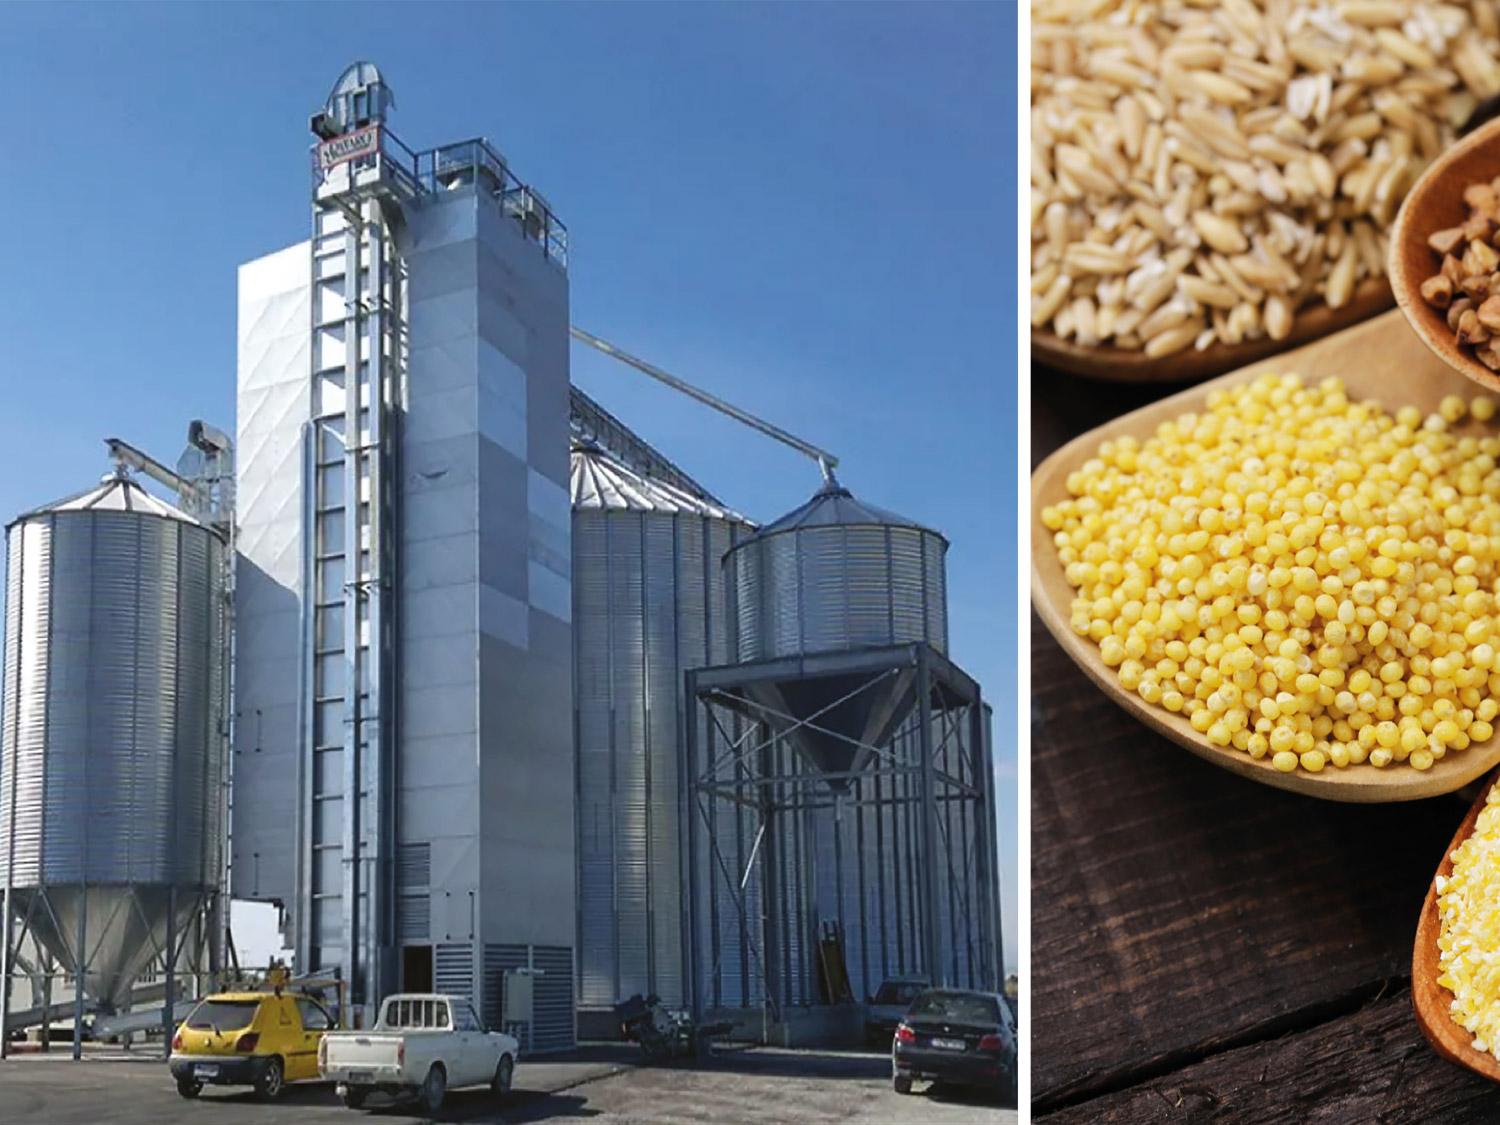 SR ENERGY in the cereal drying process Tecnoclima